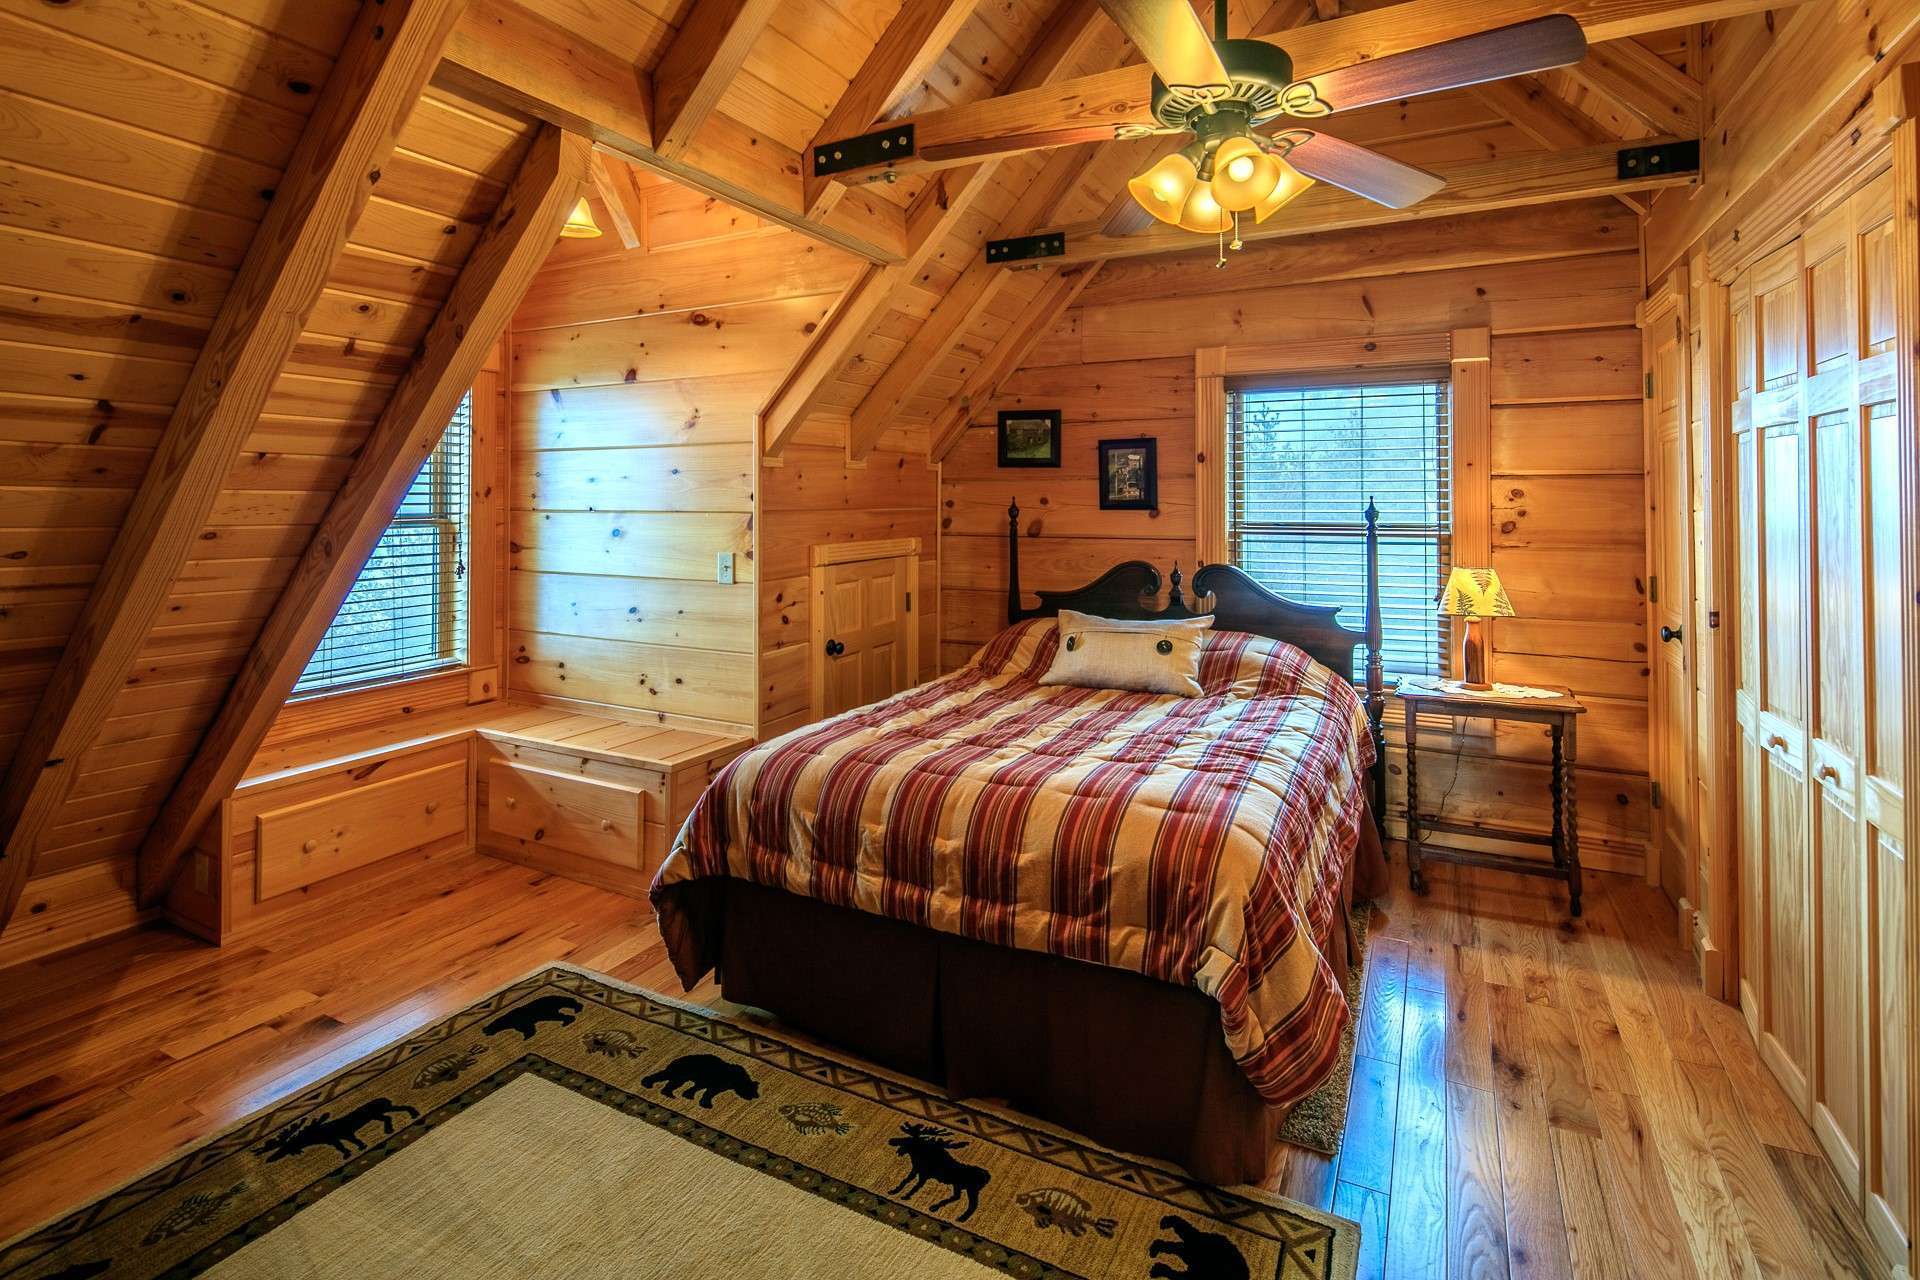 The second bedroom and full bath is found on the upper level giving your overnight guests privacy.